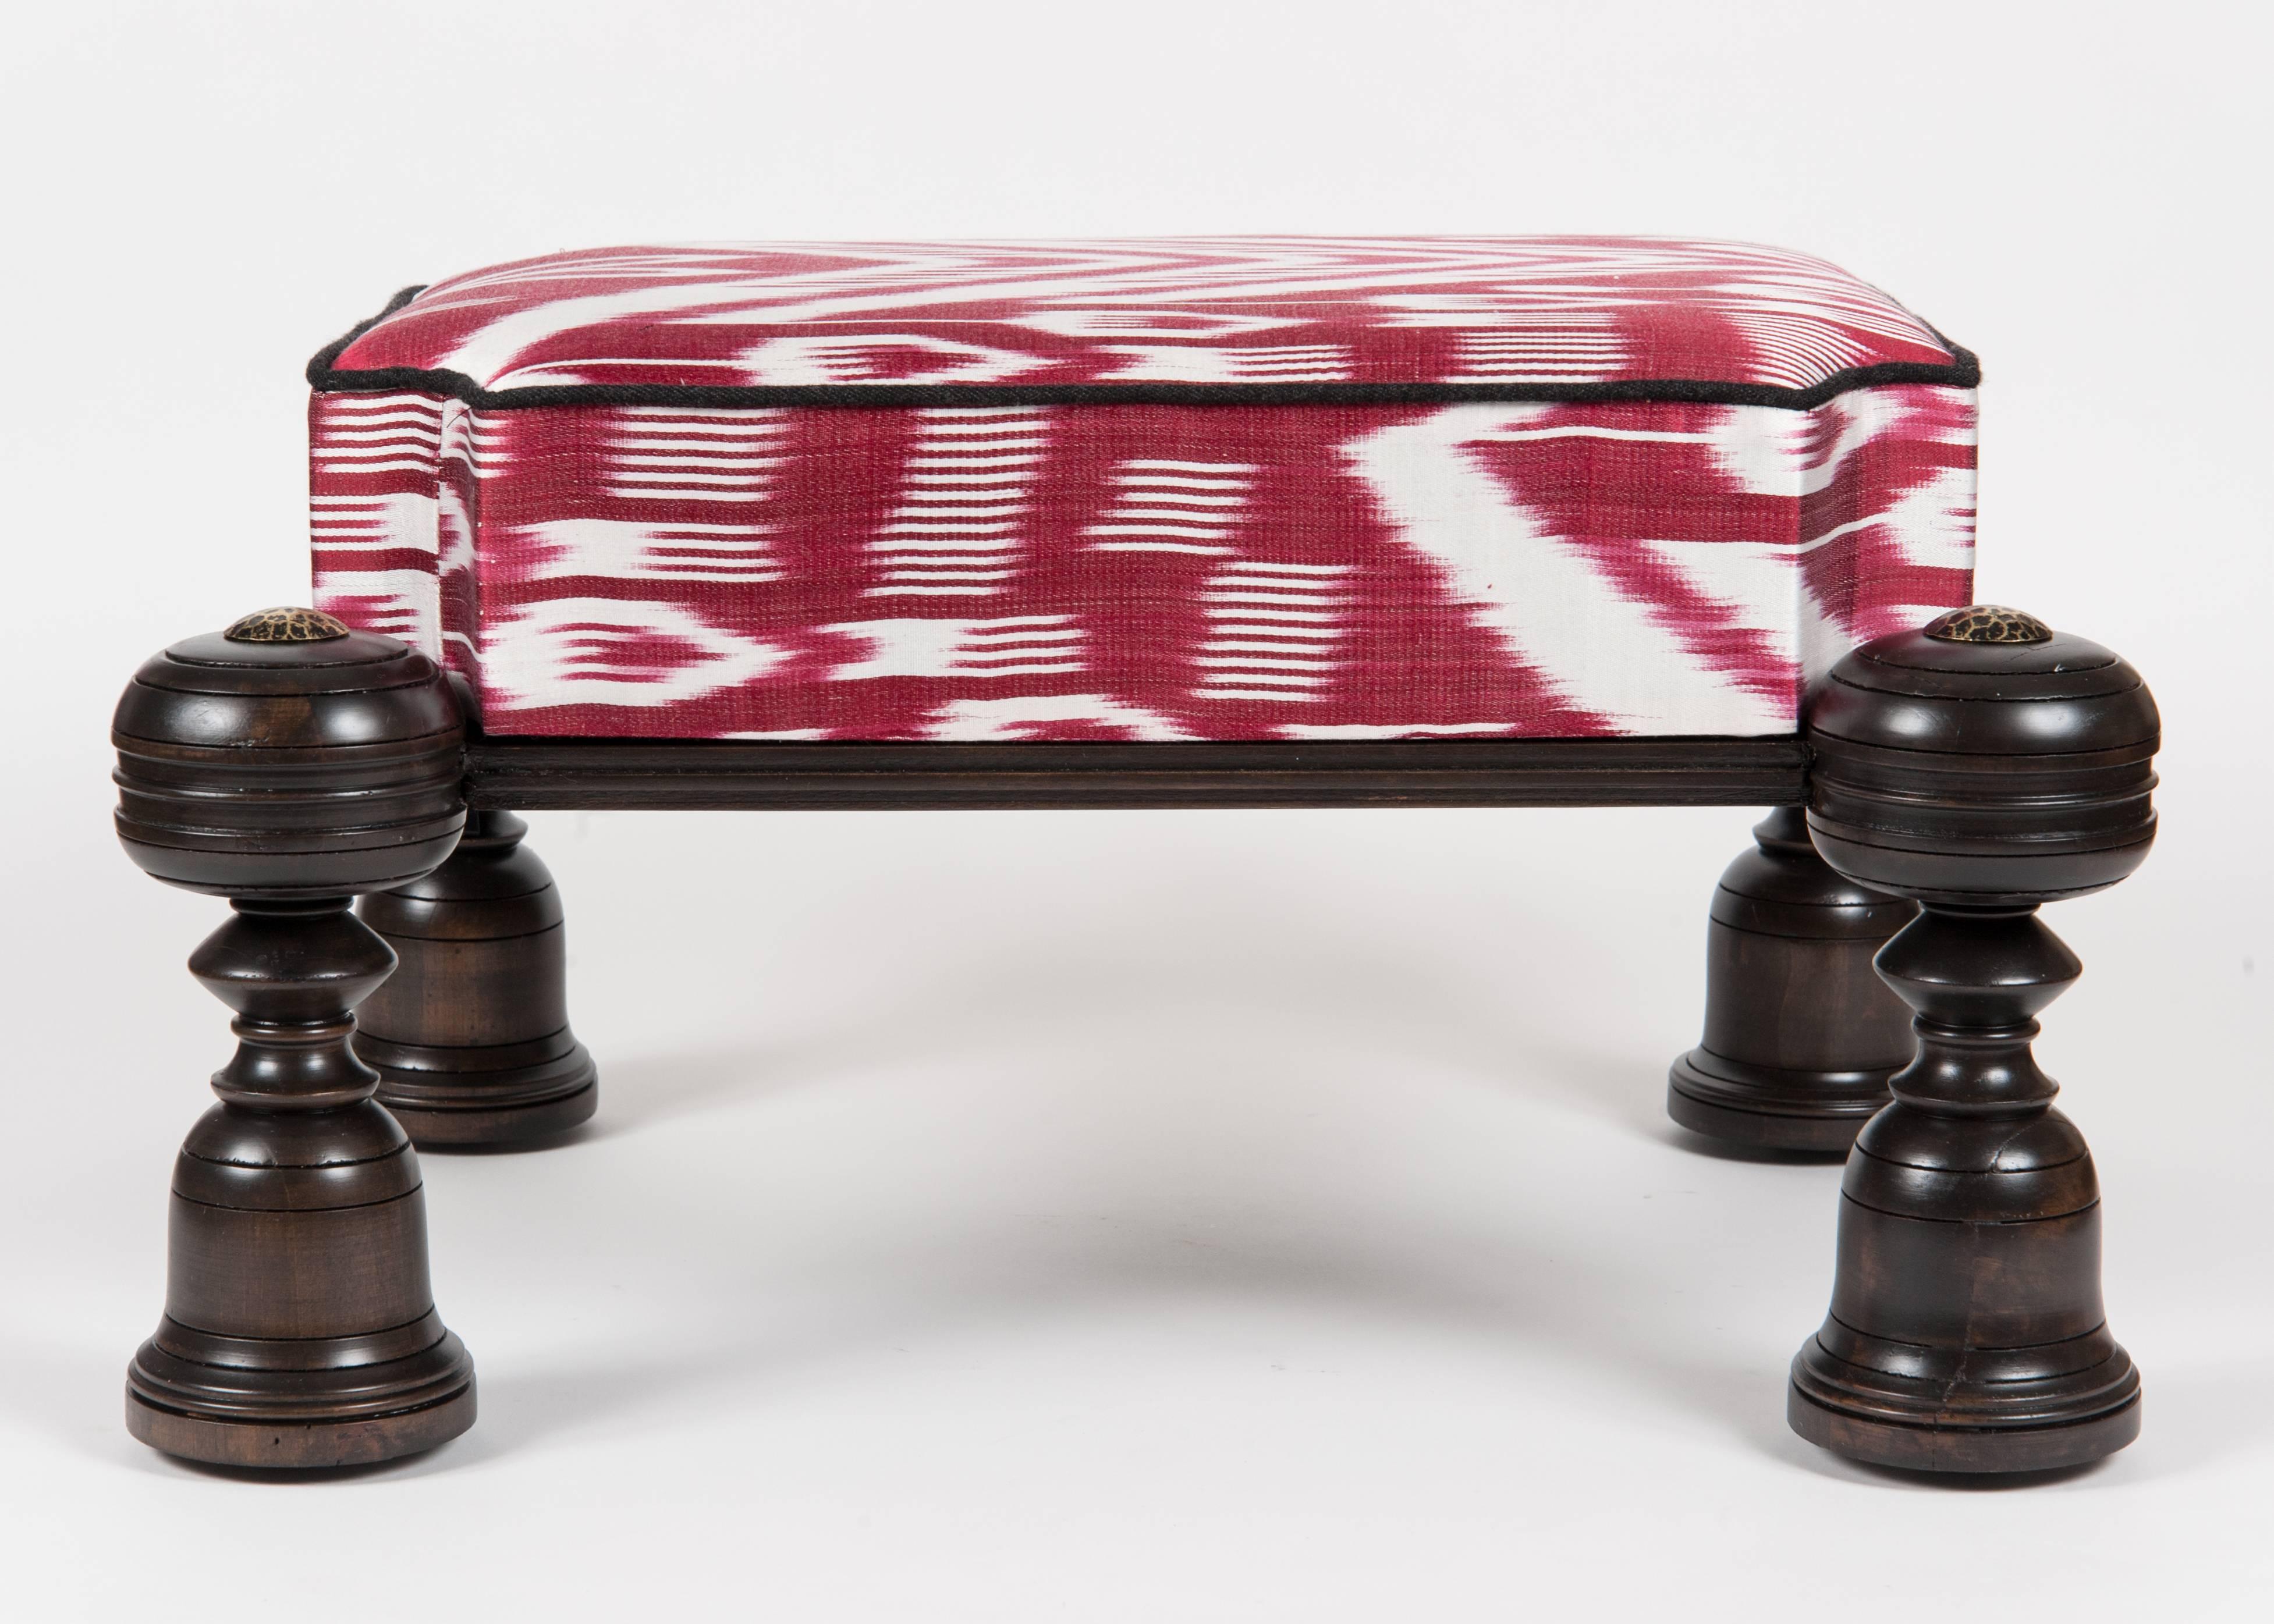 Martyn Lawrence Bullard's custom Devi footstool.
Inspired by 18th century Indian charpoy beds. This is a wonderful and useful accent piece.